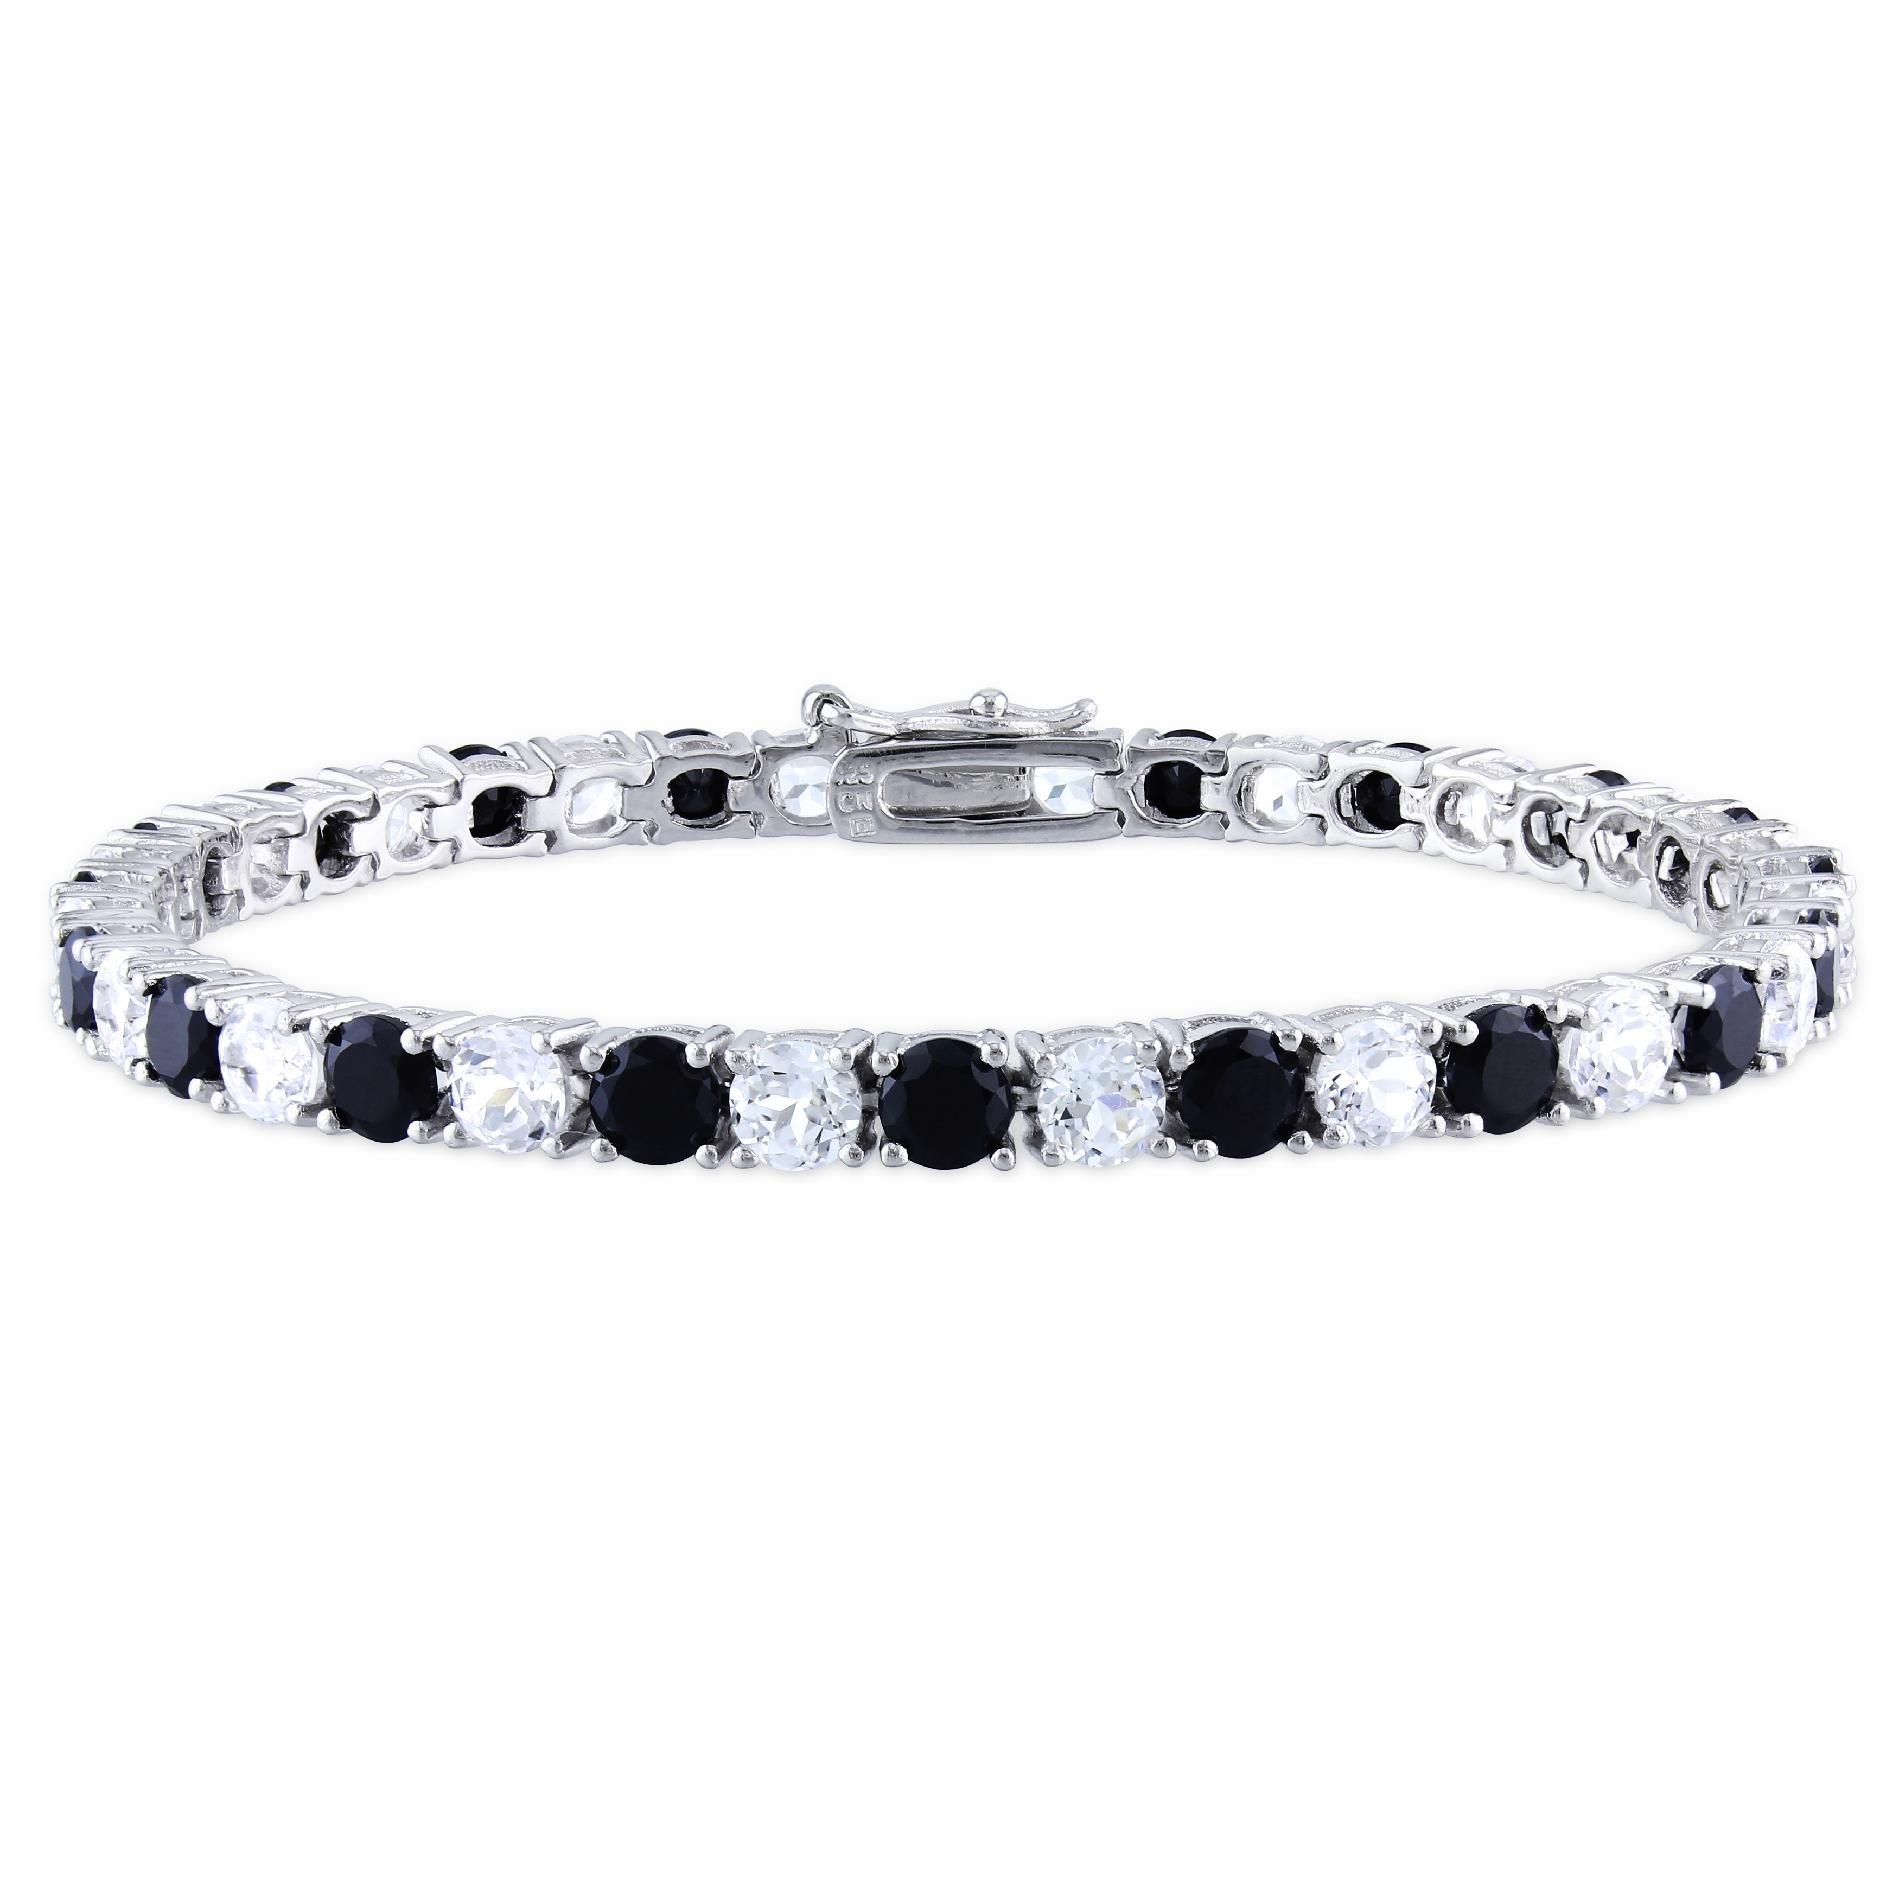 14 1/4 CT Created White Sapphire & Black Spinel Silver Bracelet 7"